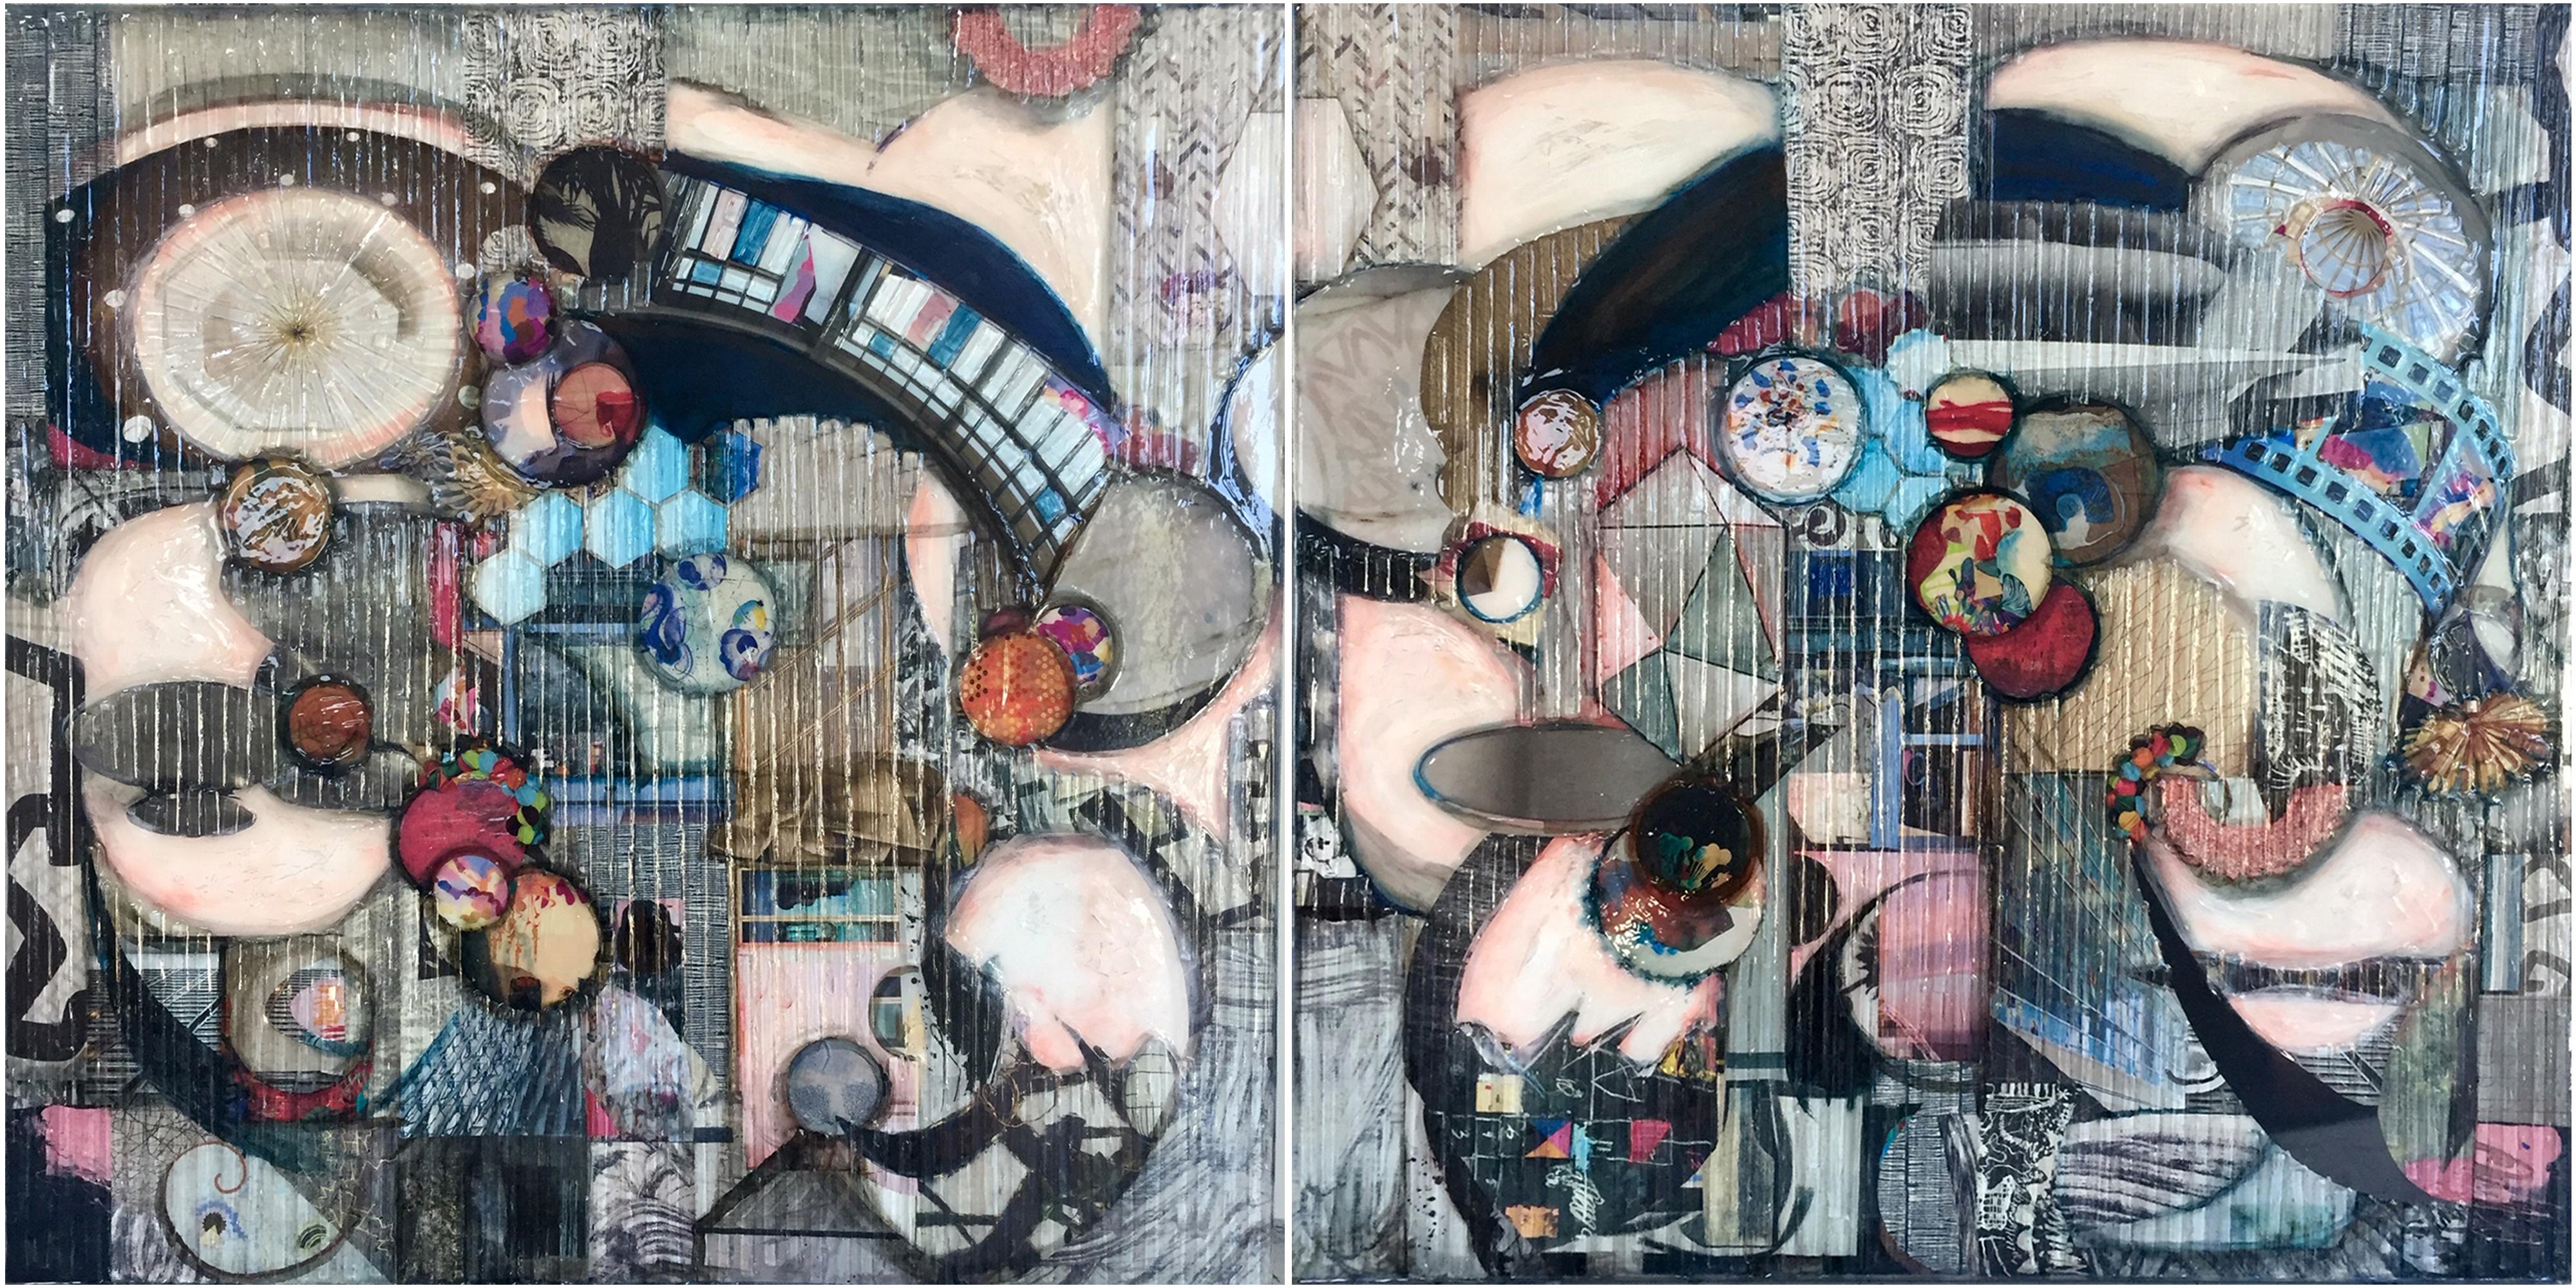 Two 24" X 24" panels, $3,450 per panel or $7000 for both. 
Madonna Phillip's original art technique in glass and mixed media developed after studying with a master stained glass painter and experimentation. She is inspired by the qualities of glass